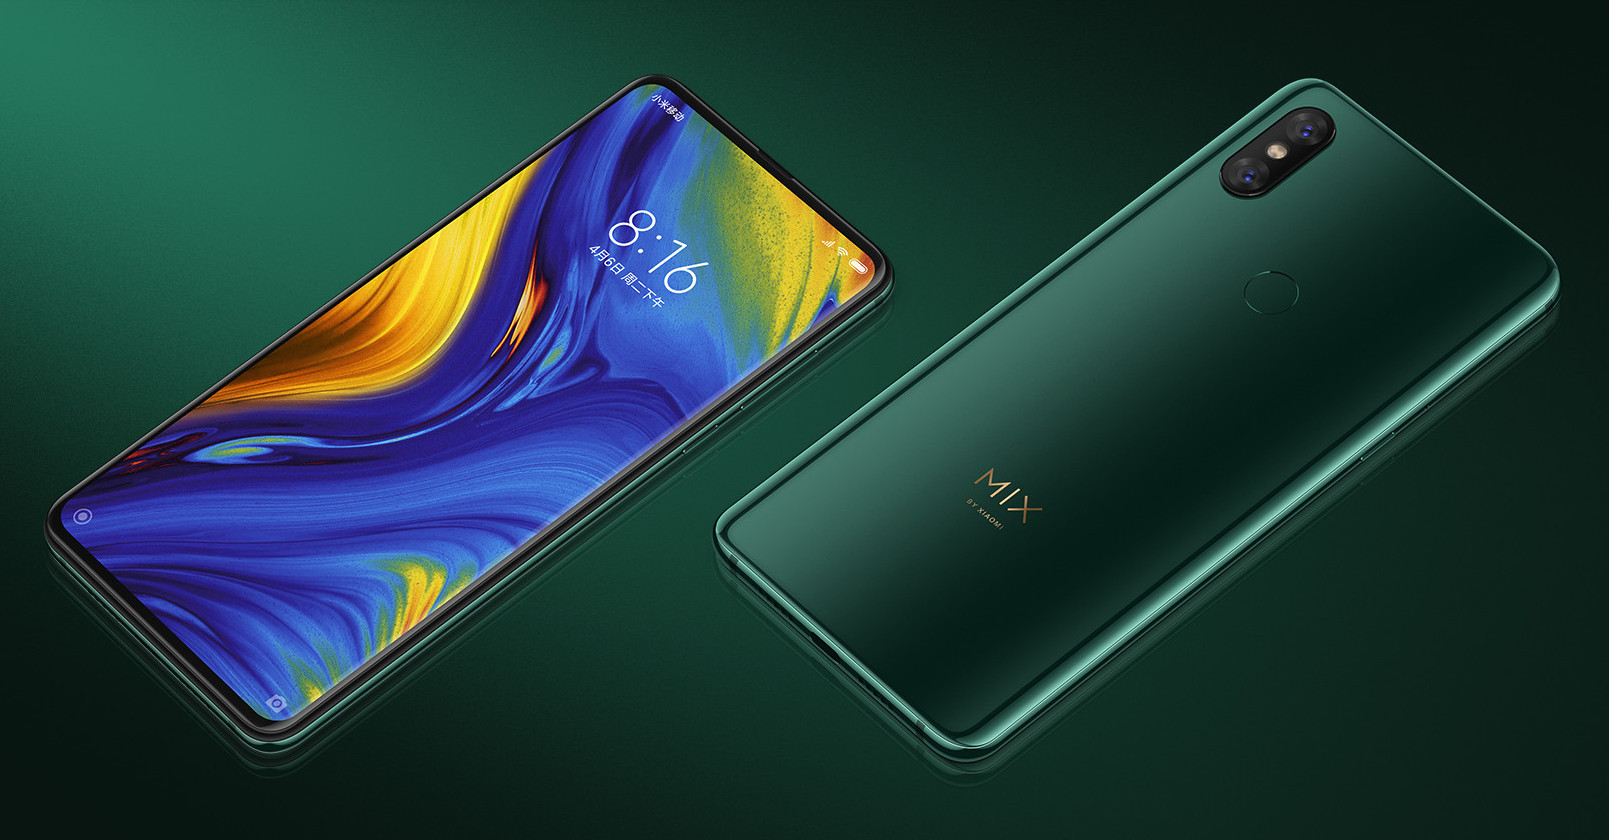 Ged Seks seng The Mi Mix 3 finally receives Android 10 globally, its first OS upgrade -  NotebookCheck.net News